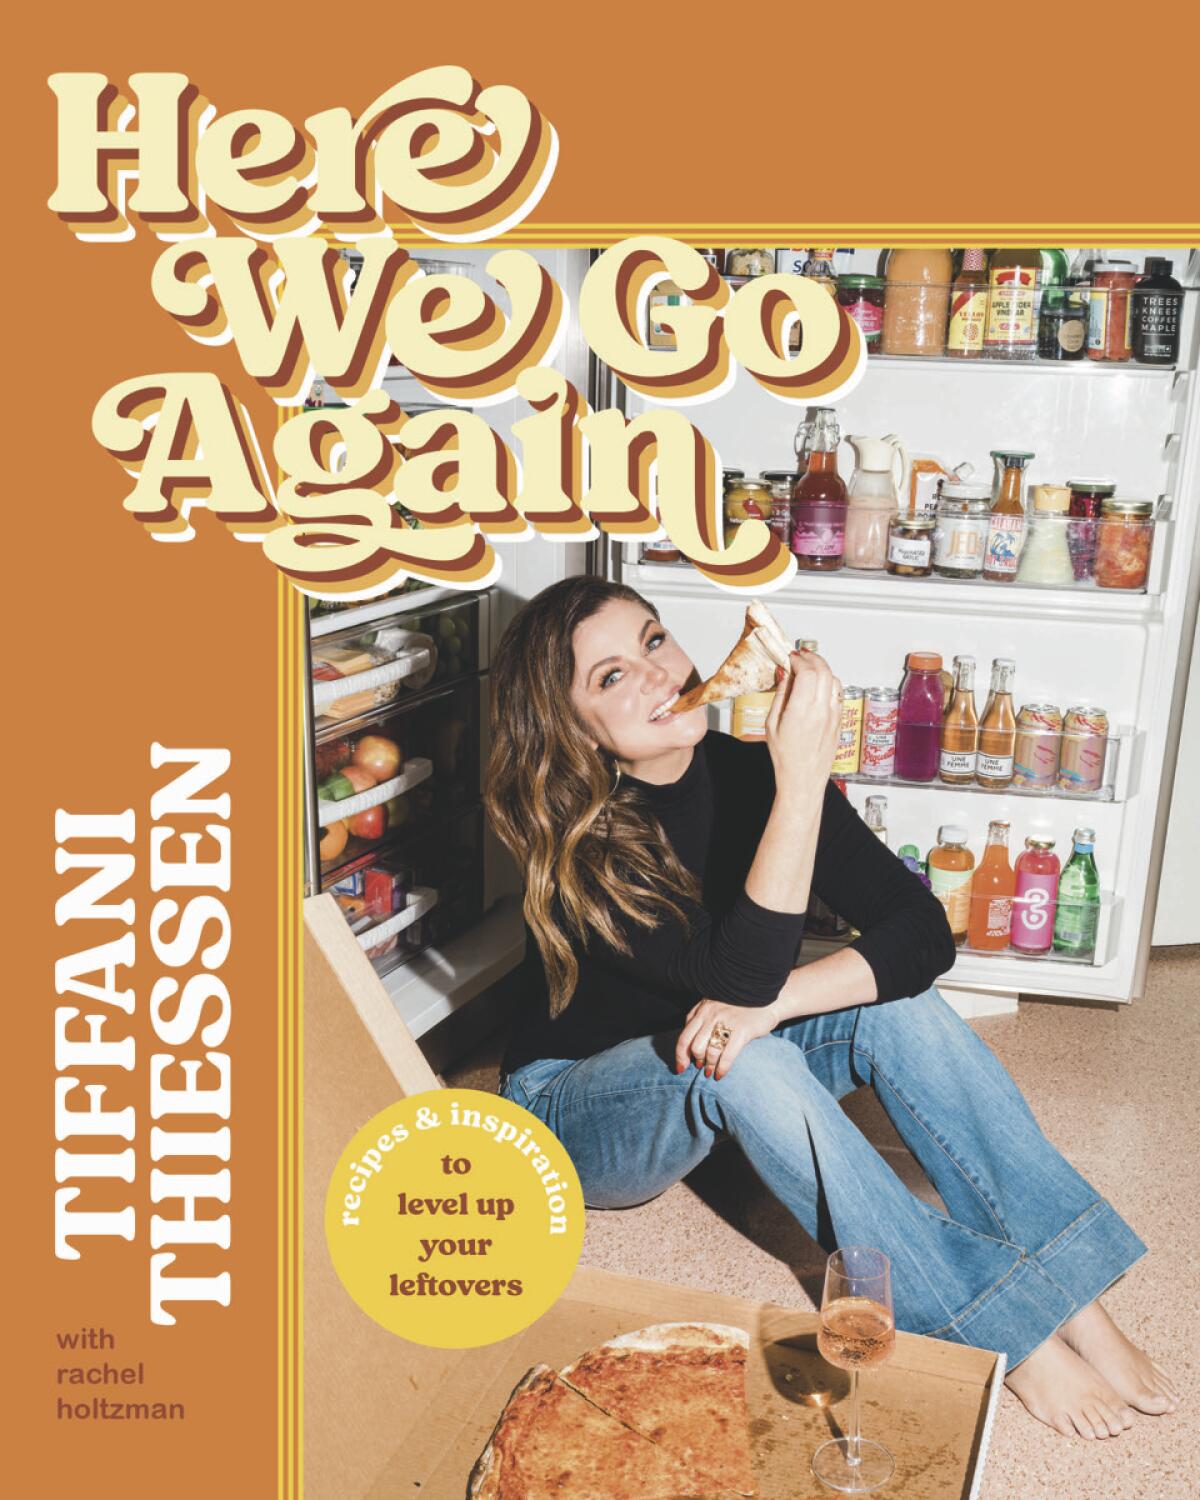 The cover of "Here We Go Again: Recipes and Inspiration to Level Up Your Leftovers" by Tiffani Thiessen with Rachel Holtzman.